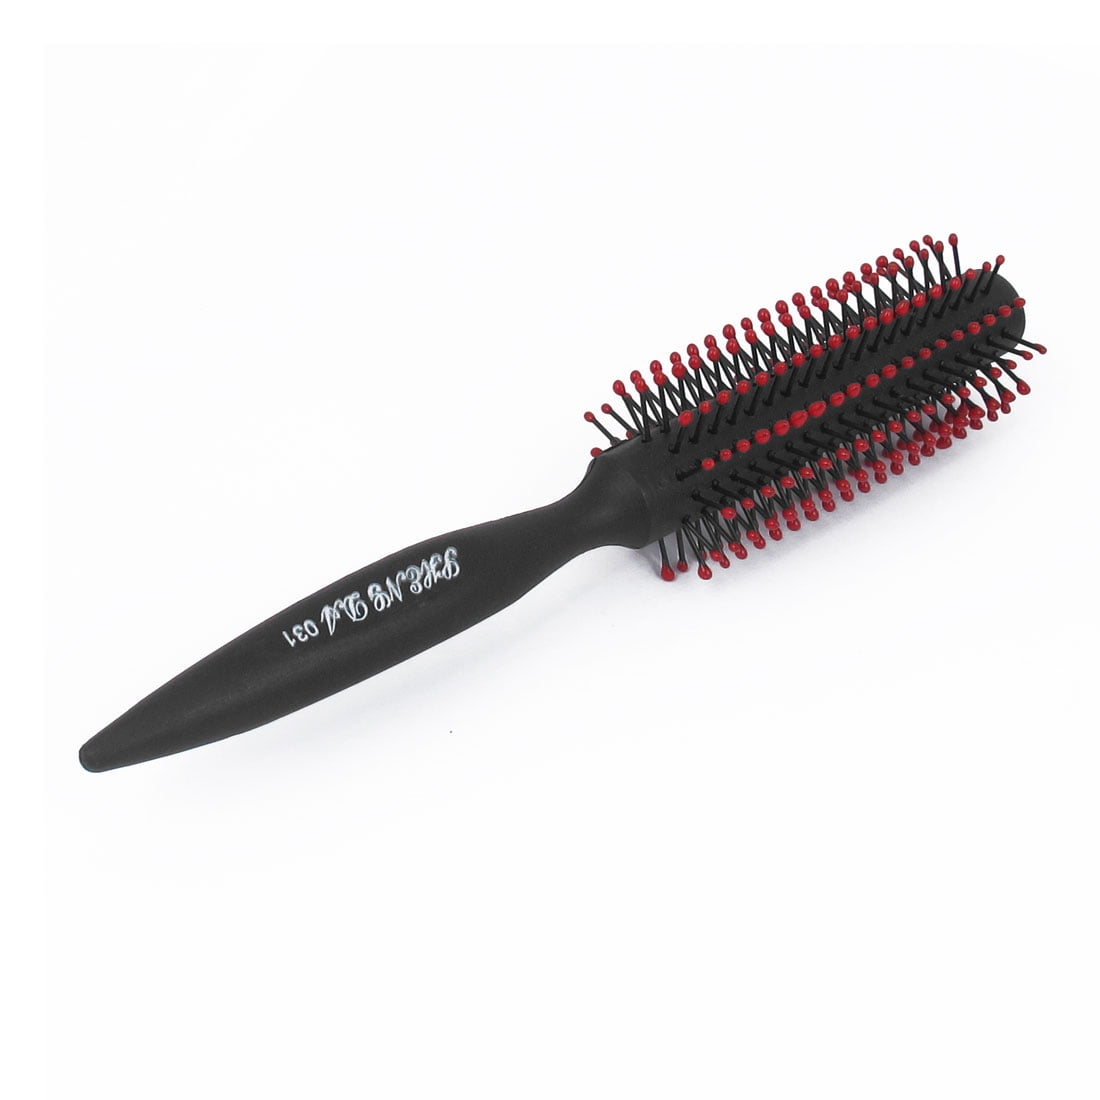 Bossman The Claw Hair Brush Cleaner Tool - Cleans Boar Bristle, Wave or Plastic Brushes and Combs - Hairbrush Cleaning Rake - 3 inch (Black)